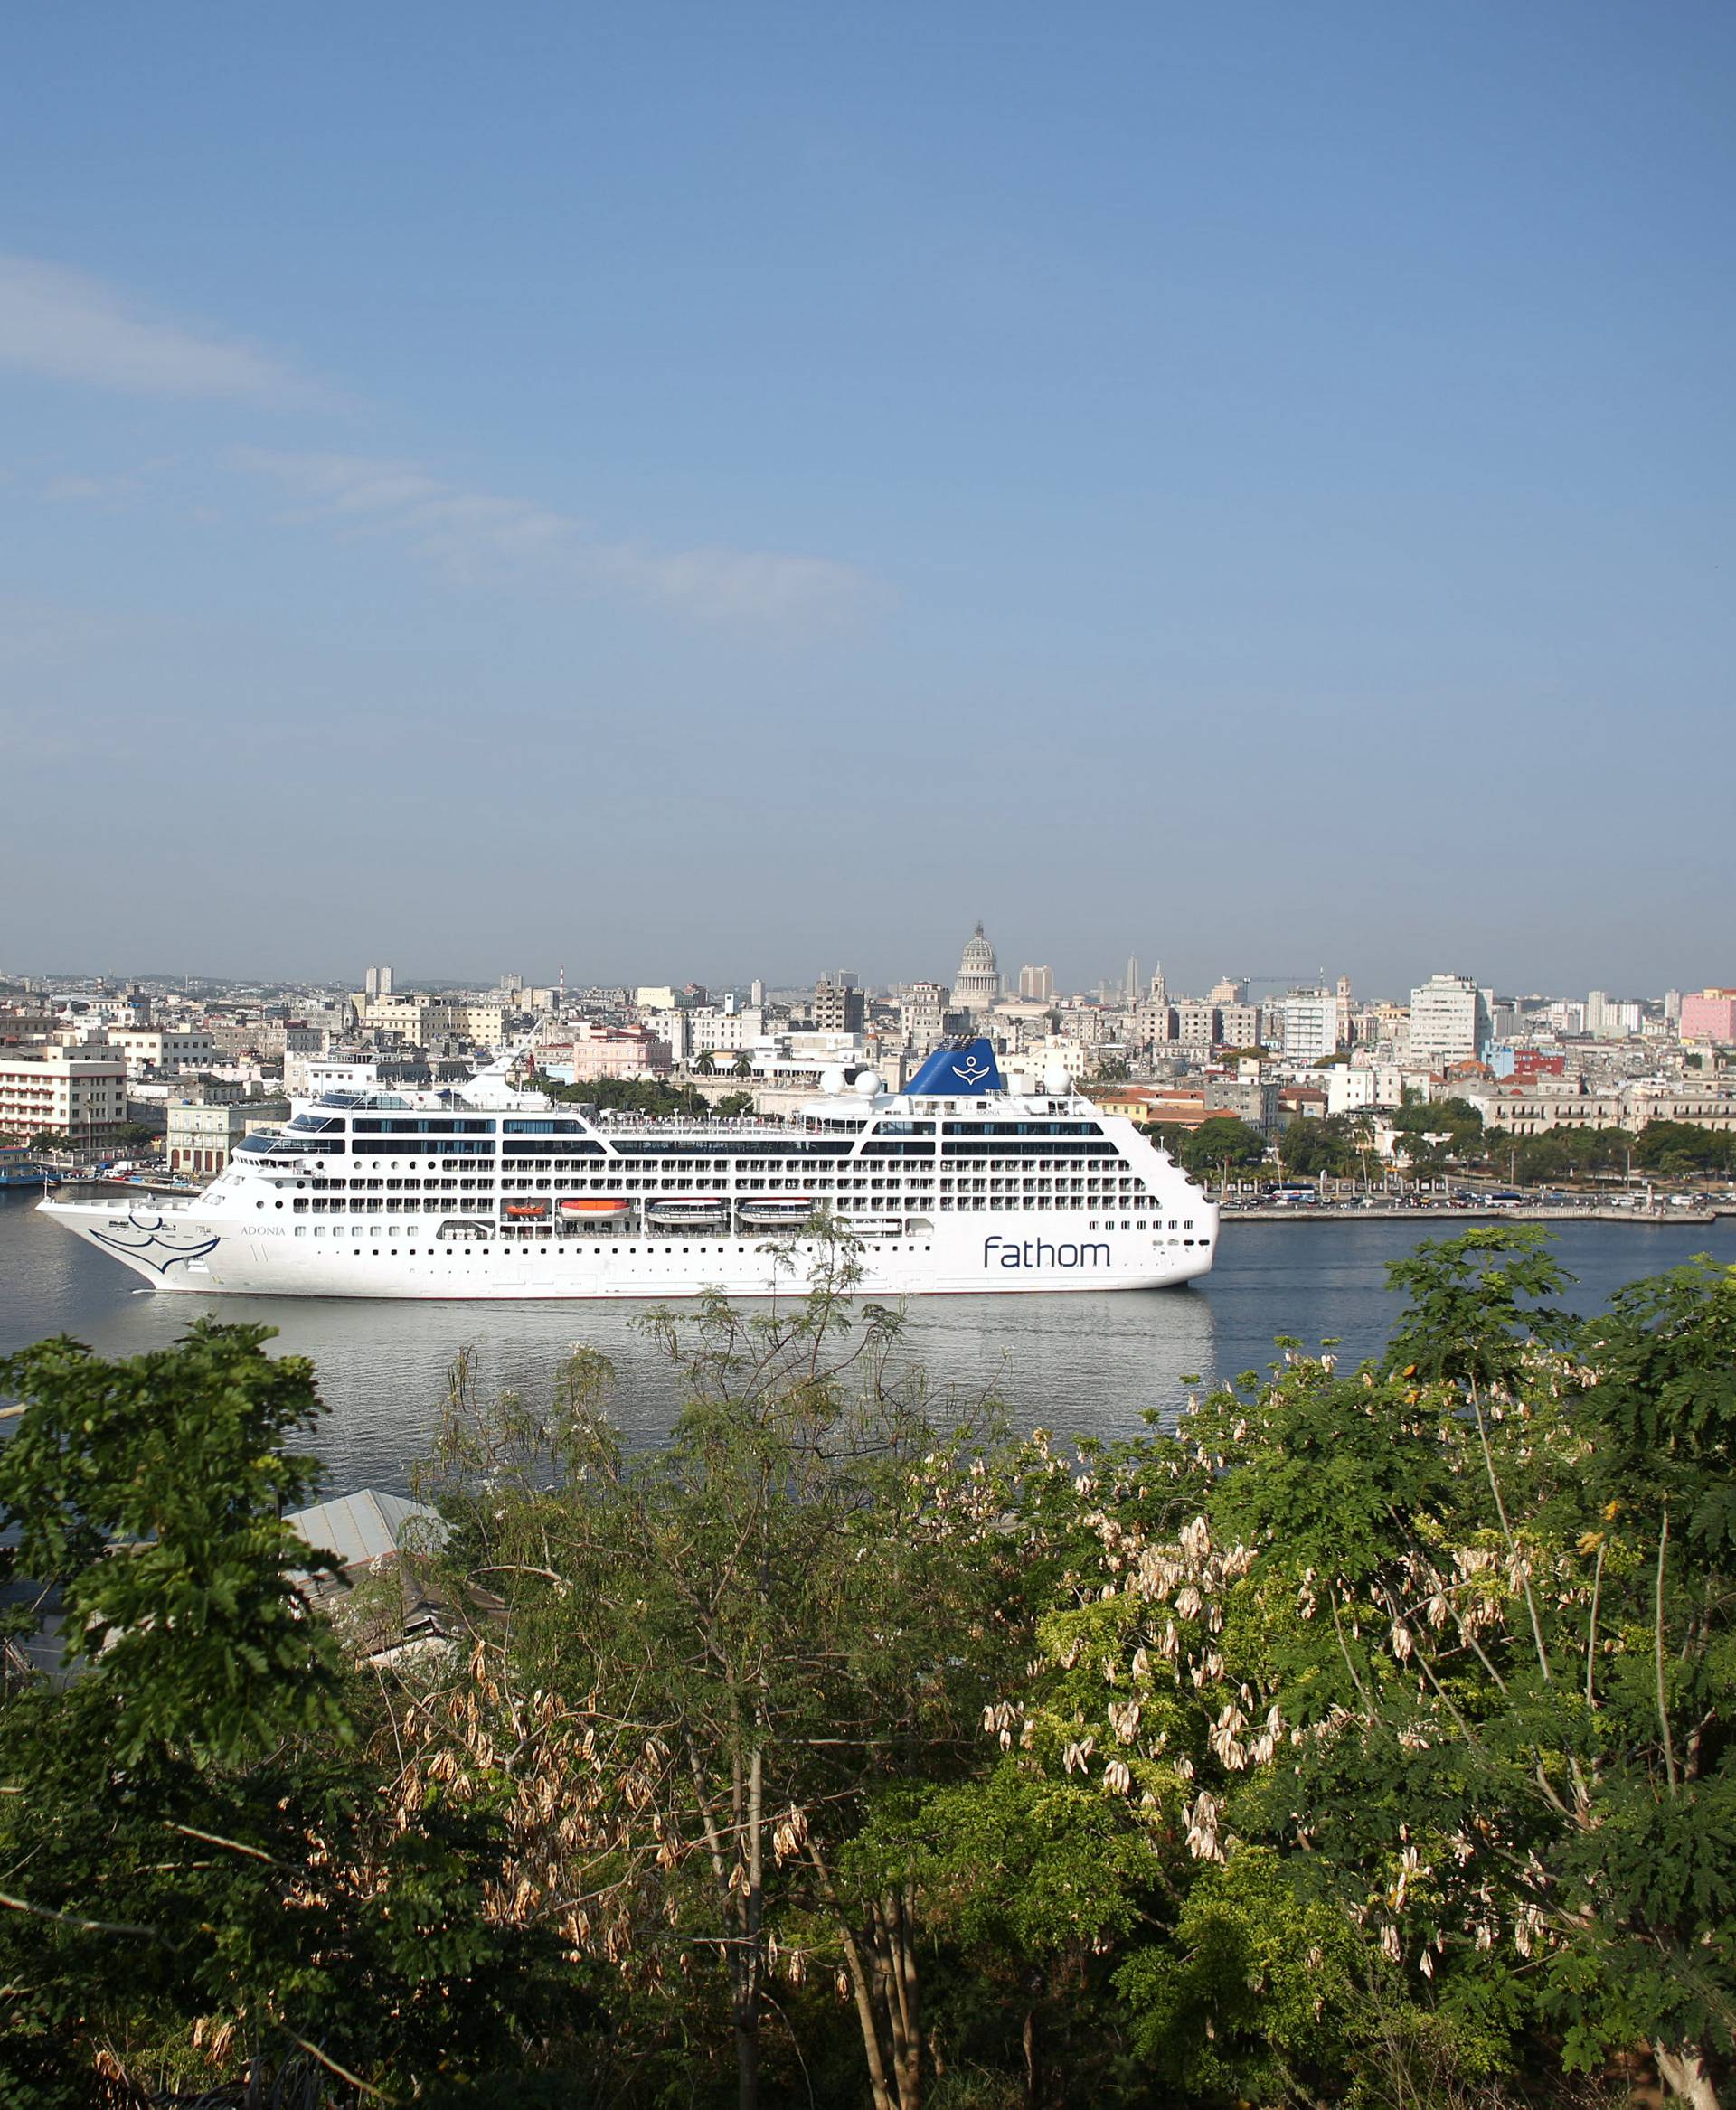 U.S. Carnival cruise ship Adonia arrives at the Havana bay, the first cruise liner to sail between the United States and Cuba since Cuba's 1959 revolution